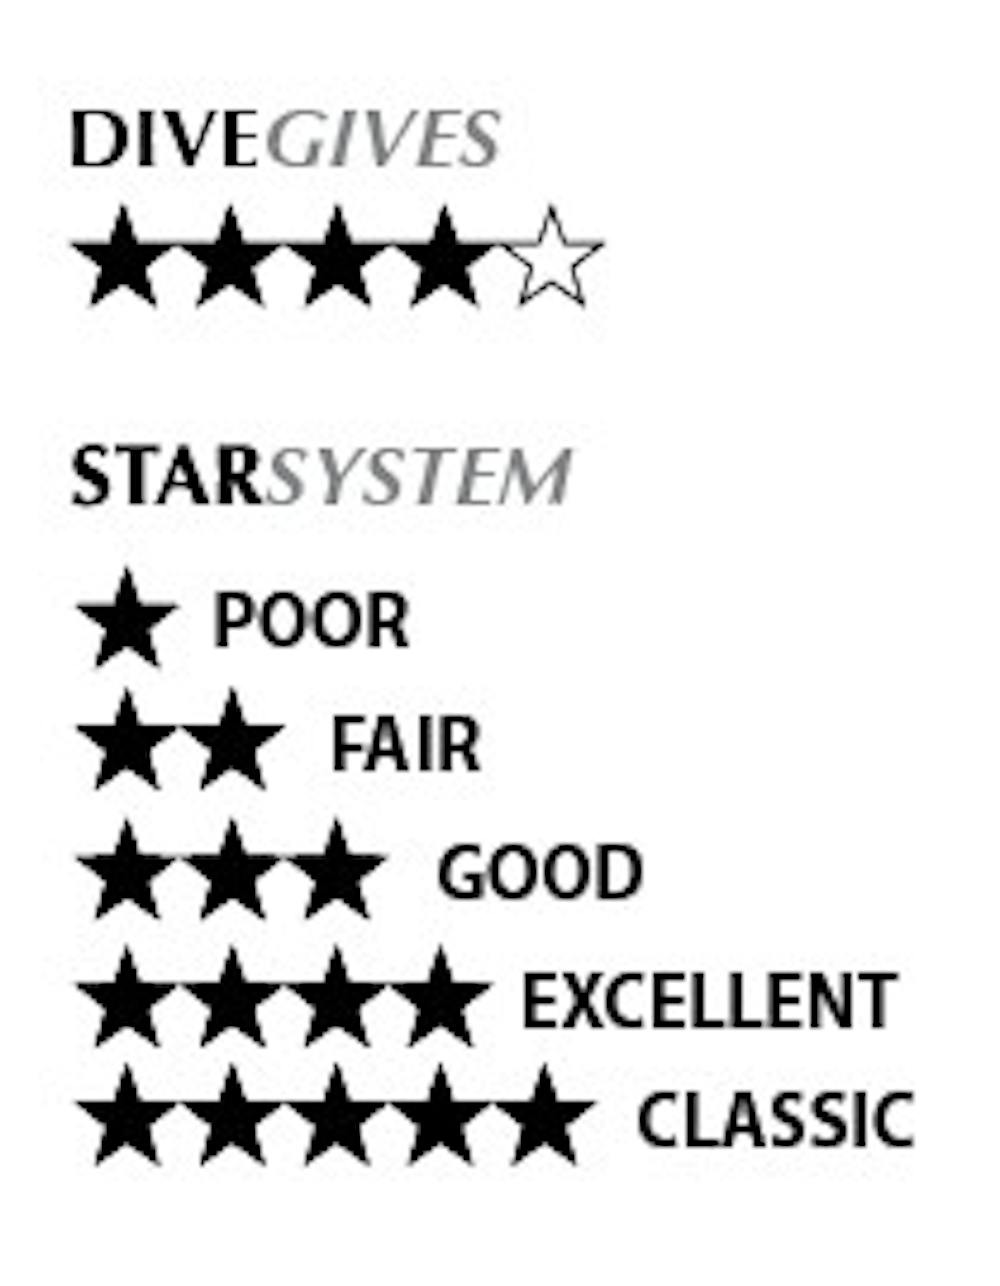 Dive gives 4 of 5 stars